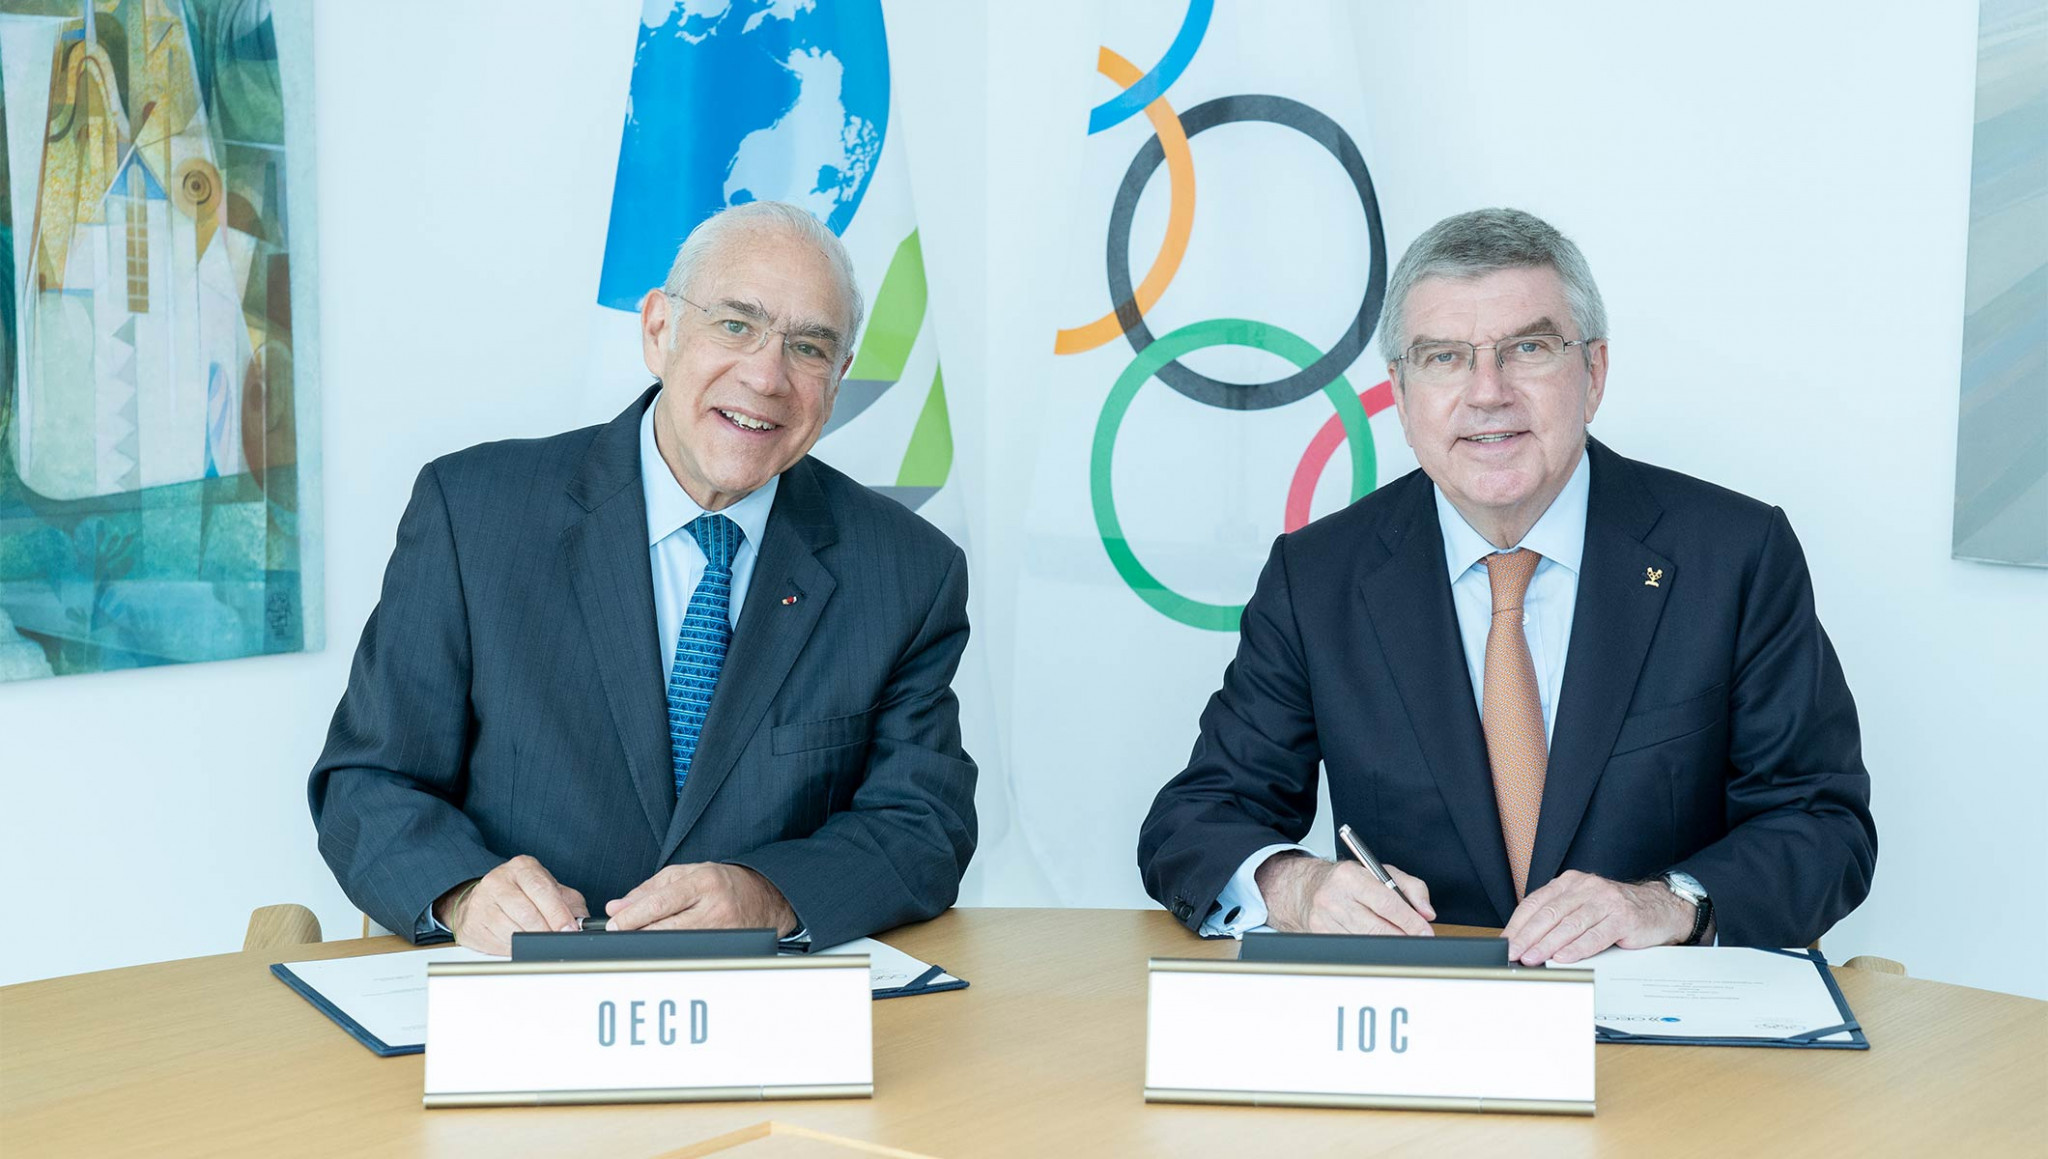 IOC Agrees With Economic Group to Tackle Corruption Ahead of Paris 2024